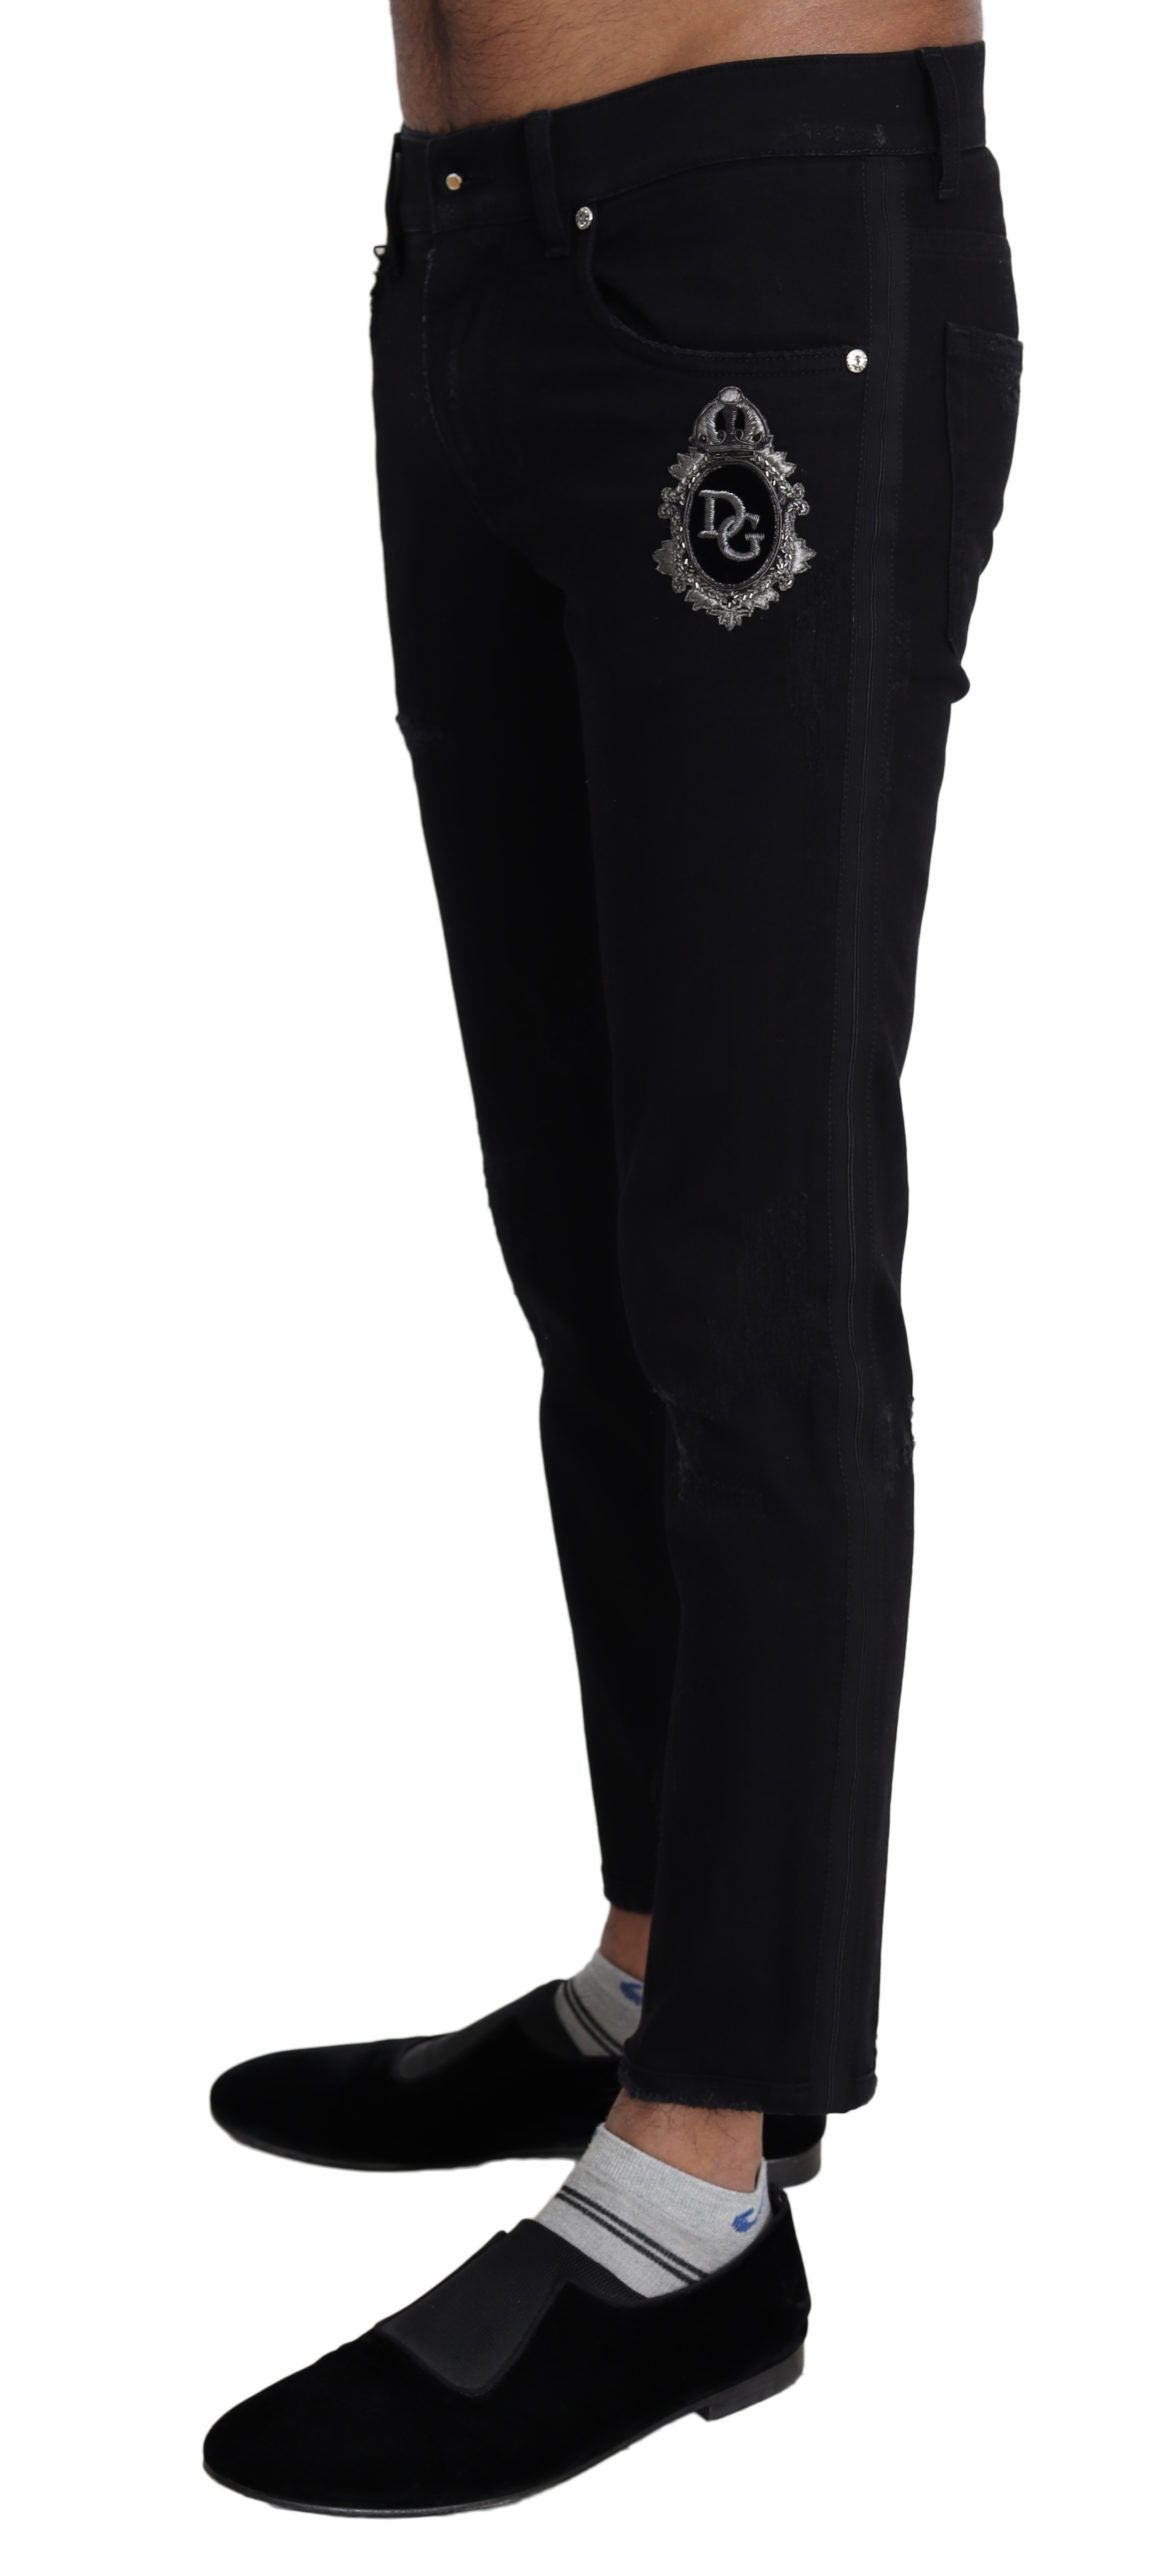 Elegant Skinny Black Jeans with Embroidery